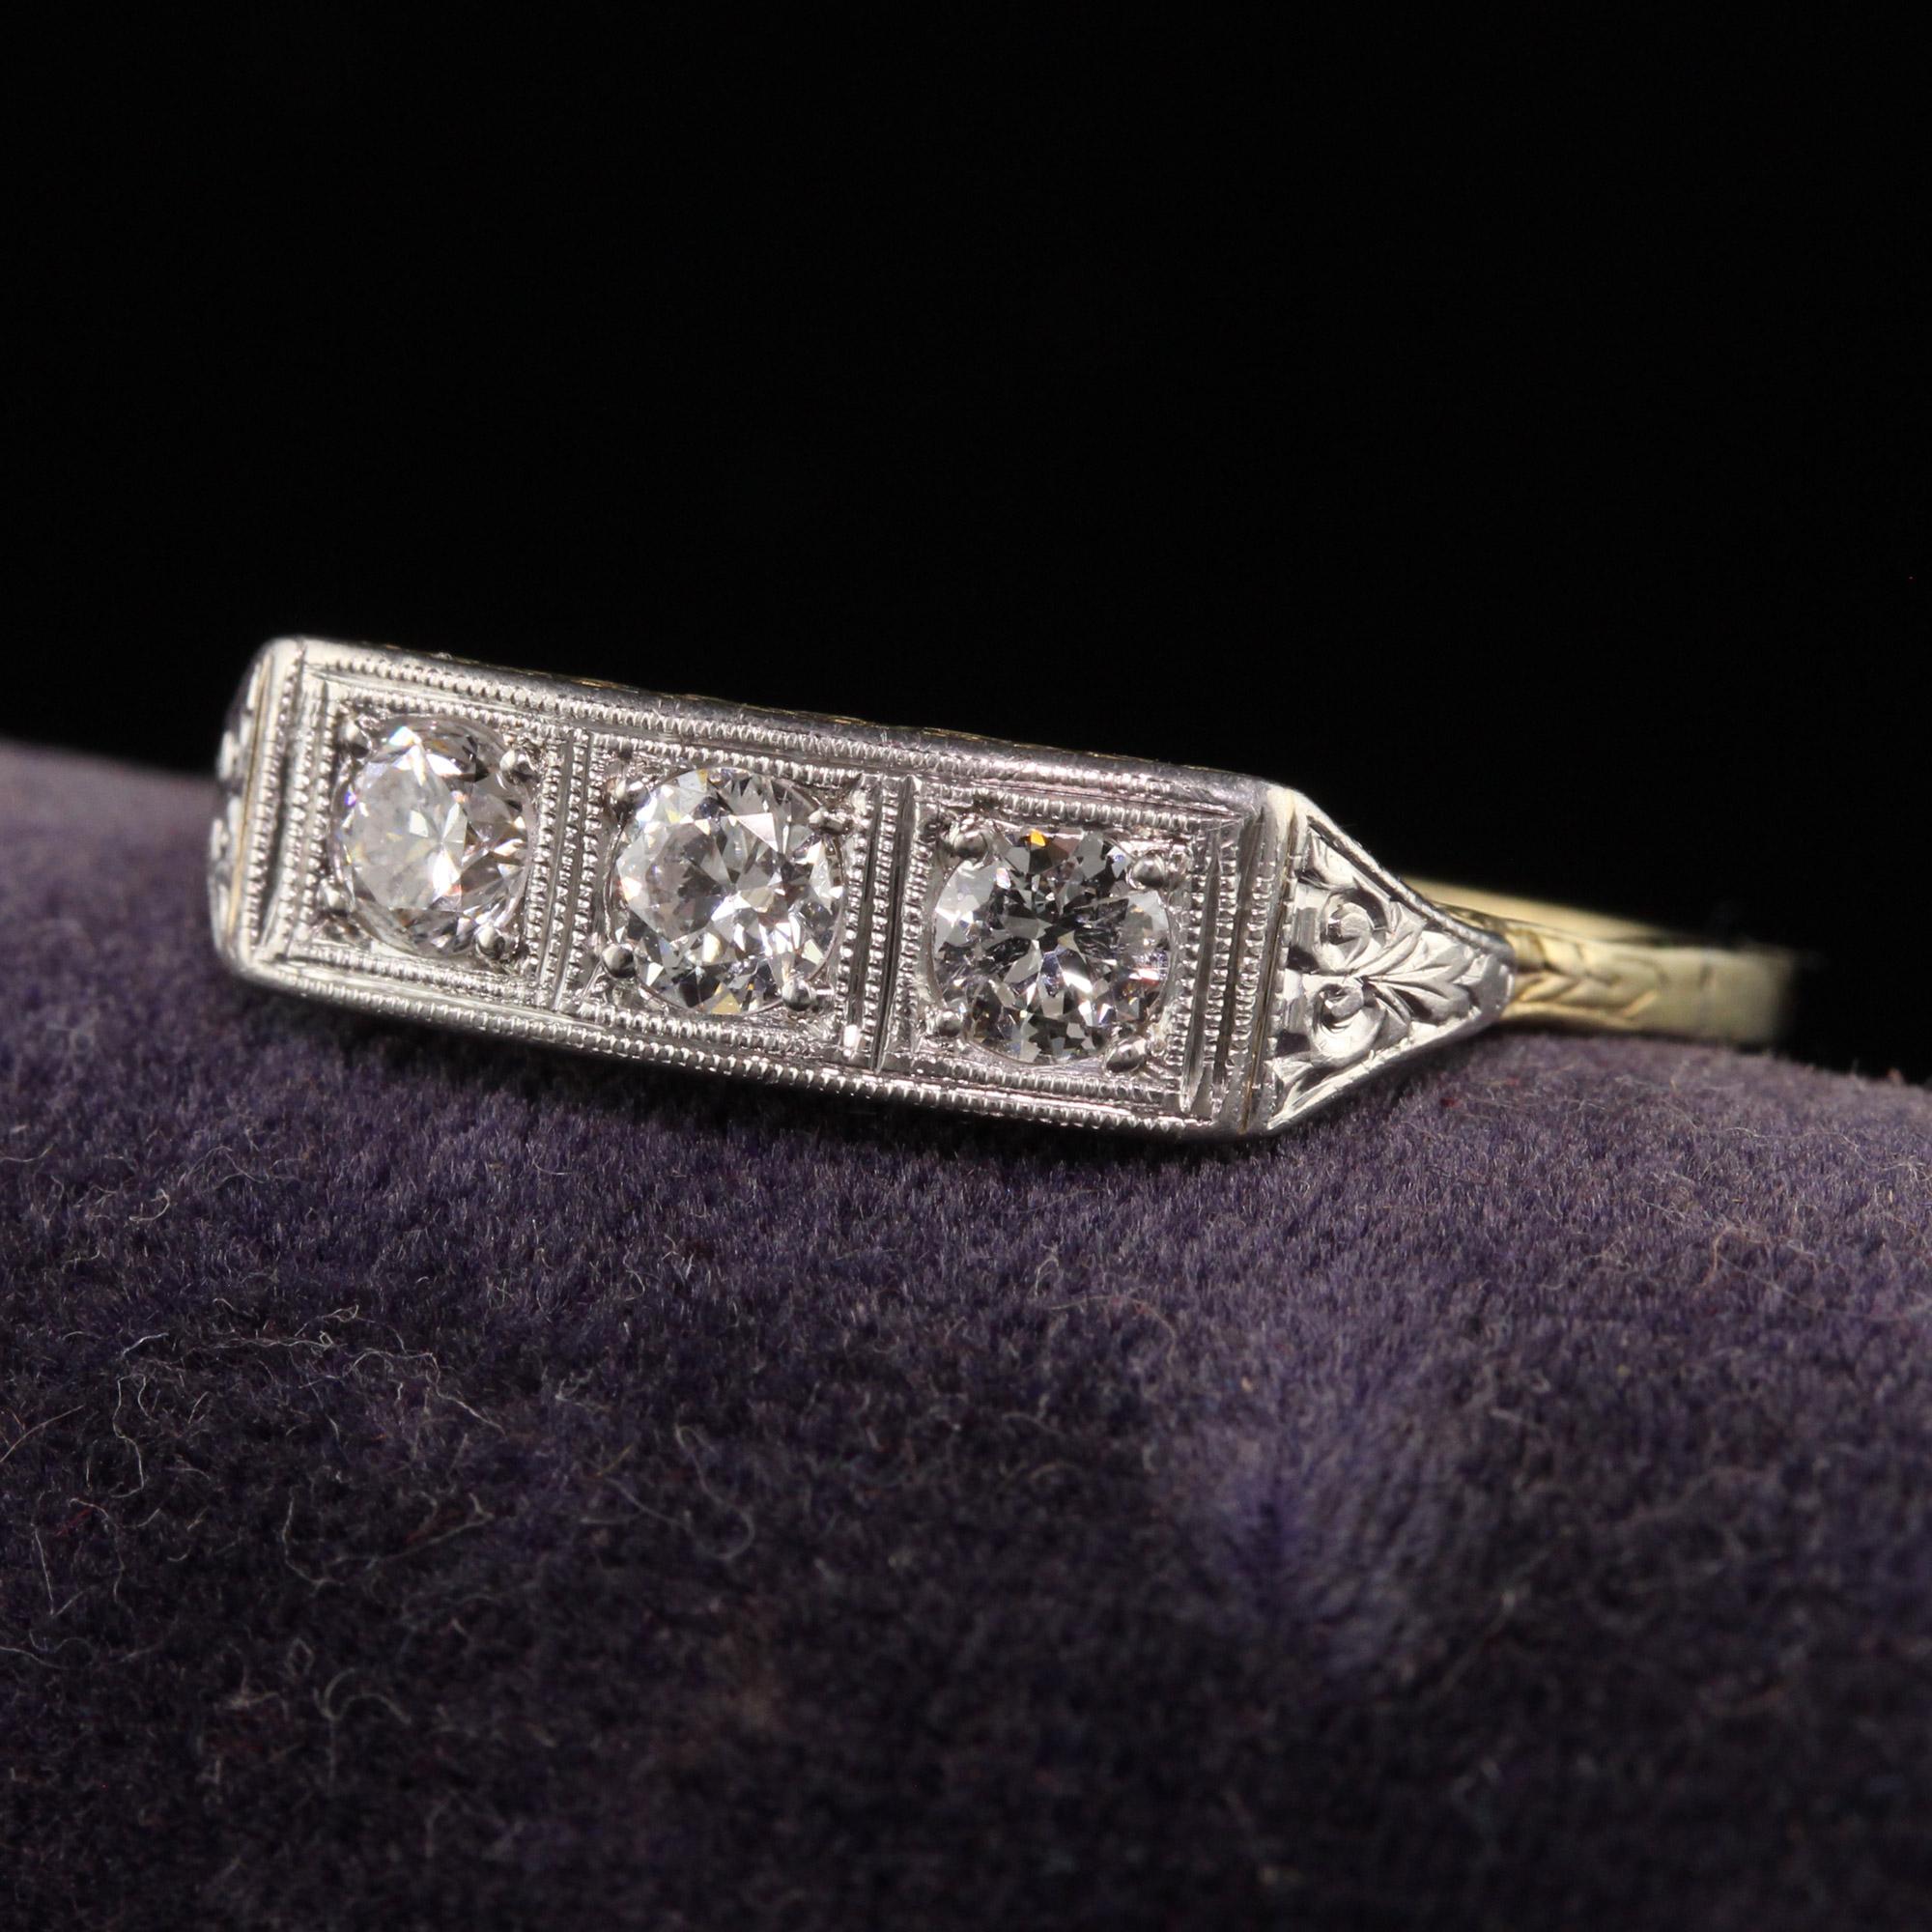 Beautiful Antique Art Deco 18K Yellow Gold and Platinum Three Diamond Filigree Ring. This beautiful three stone ring is crafted in 18k yellow gold and platinum. The ring has three old european cut diamonds and has gorgeous filigree work on the